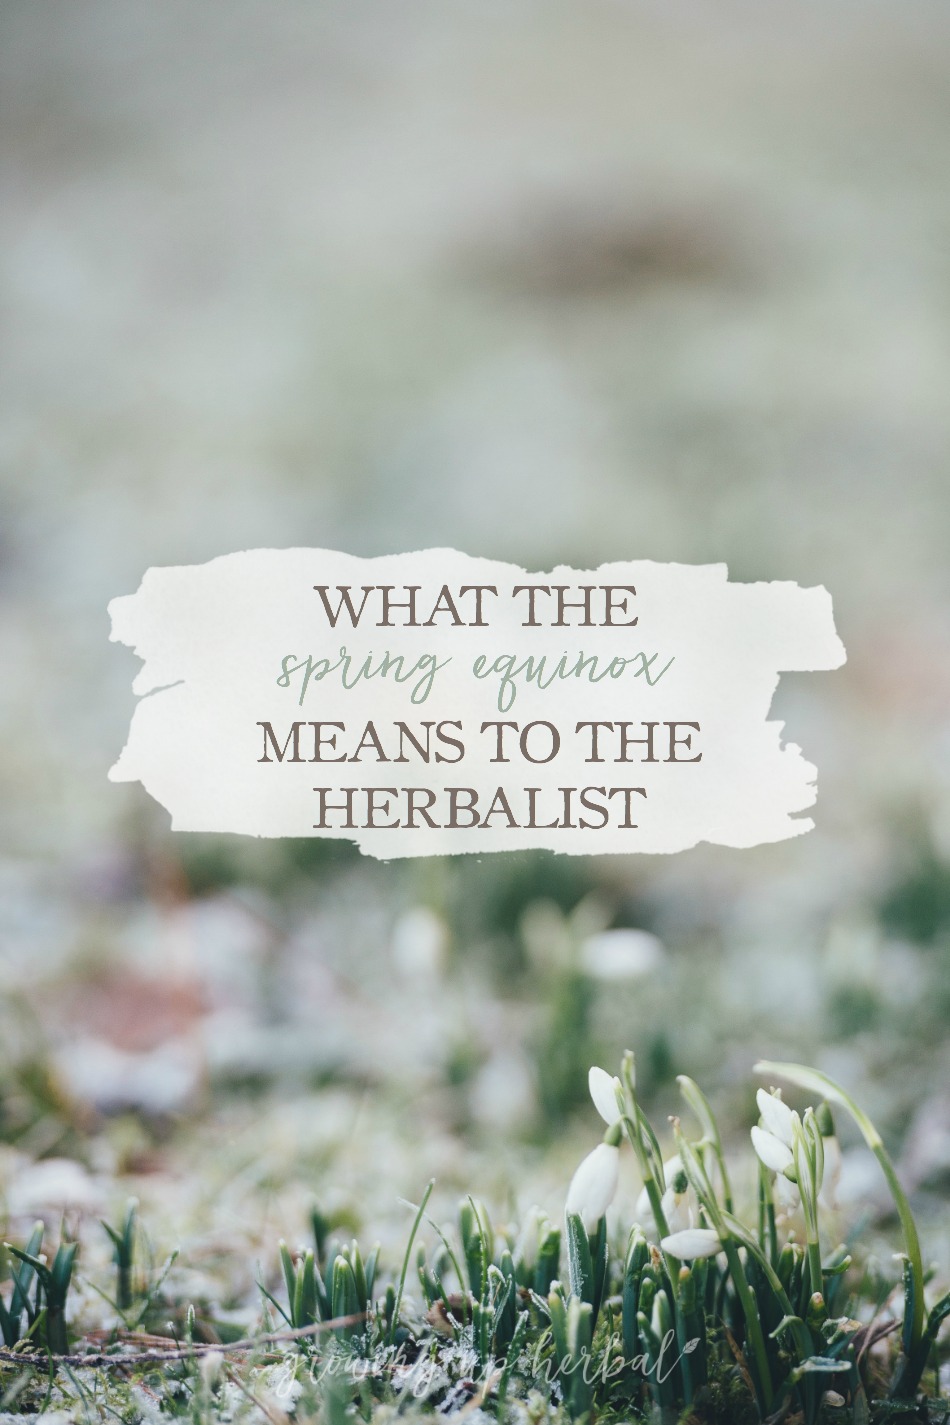 What The Spring Equinox Means To The Herbalist | Growing Up Herbal | Ever wondered how the changing of the seasons impacts you as an herbalist? Read more here to find out some interesting facts about the Spring Equinox as well as what it means to the herbalist.